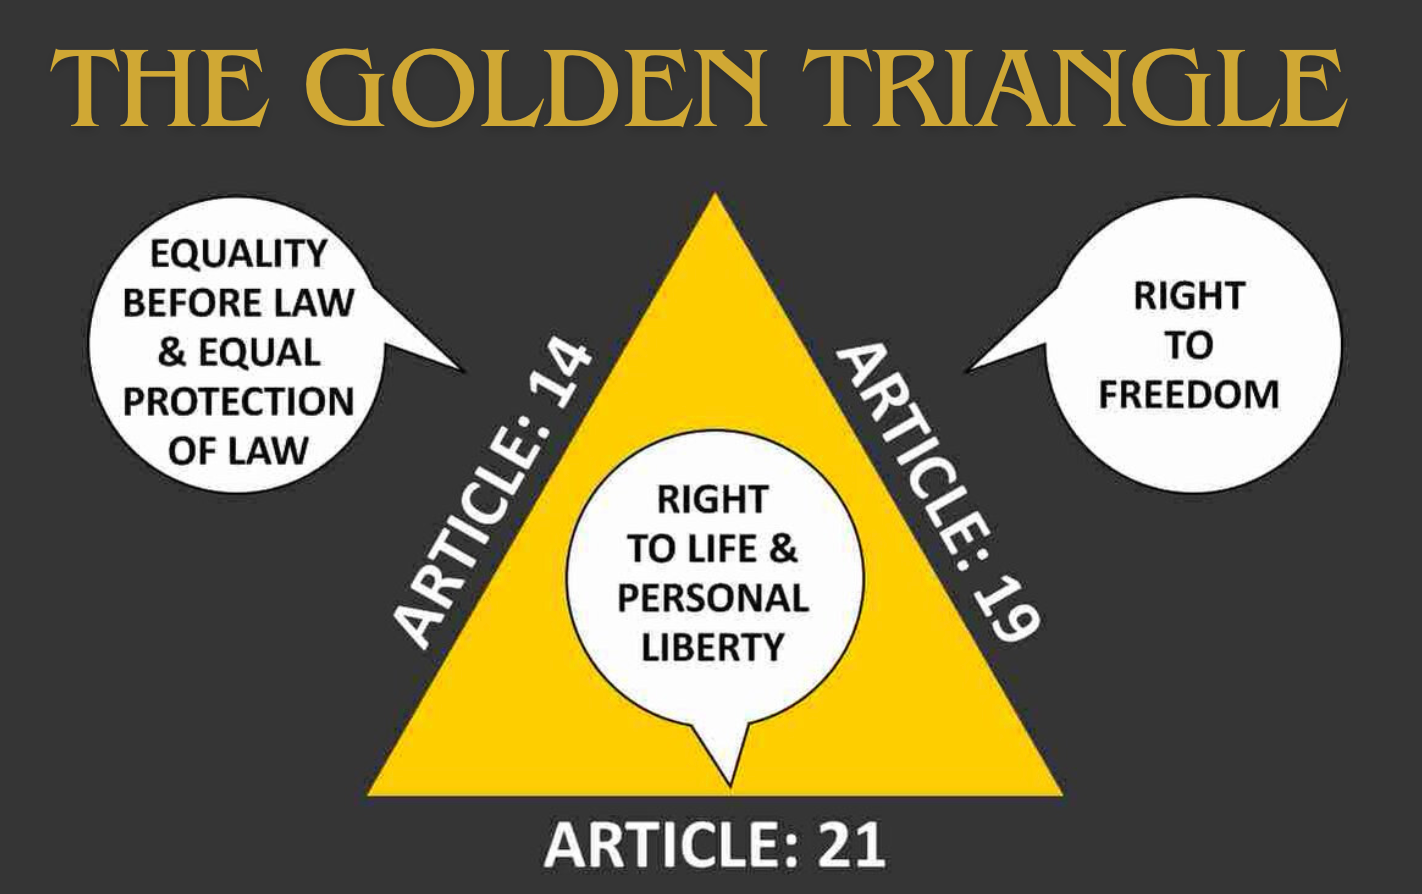 Article 21, Article 19, Article 14 - The Golden Triangle | Indian Constitution | UPSC | UPSCprep.com